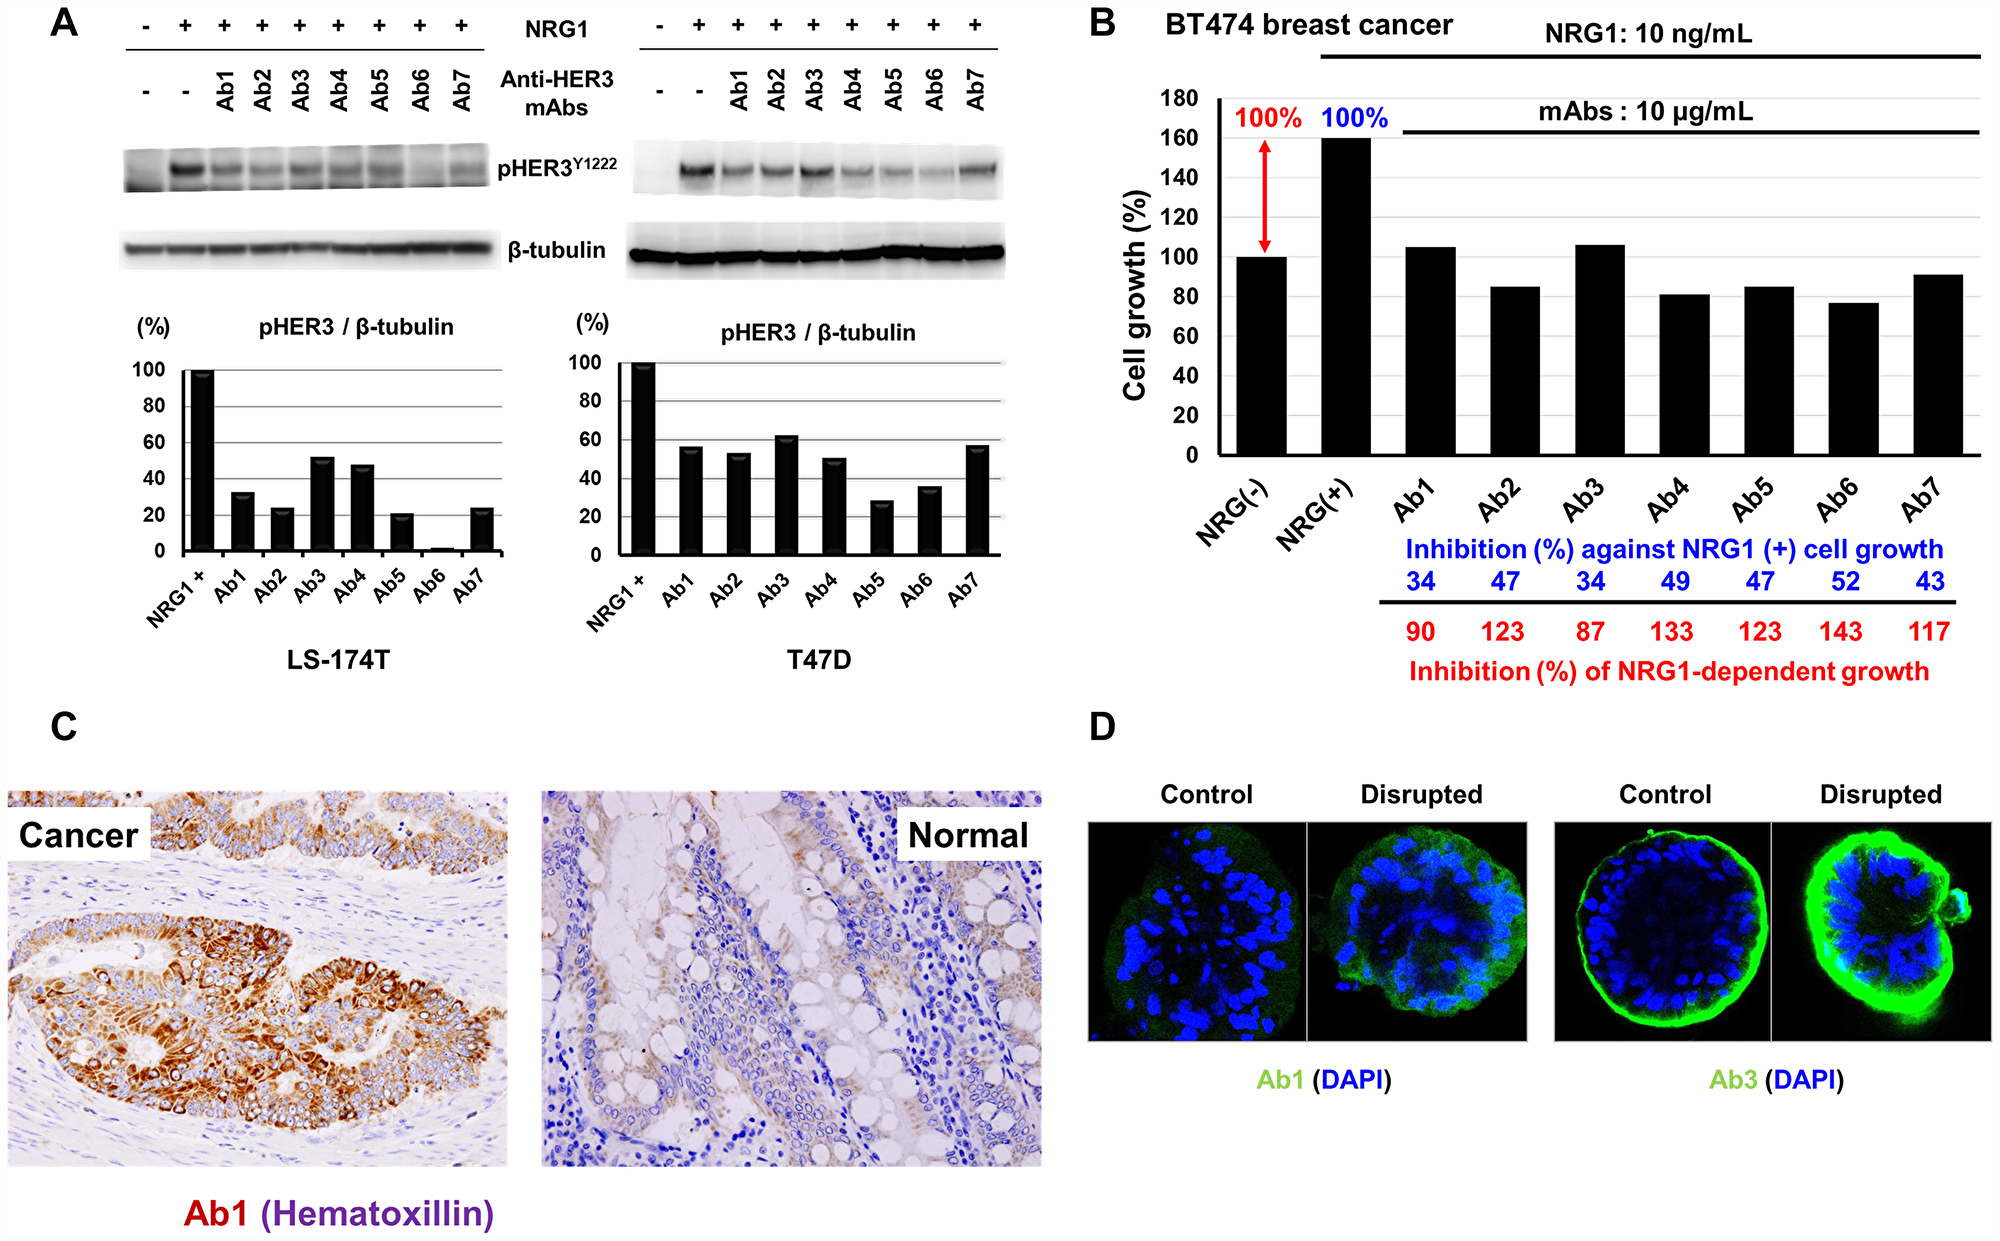 Inhibition of NRG1-induced tyrosine phosphorylation of HER3 and cell growth, and reactivity of anti-HER3 mAbs with human tissues and CTOS.